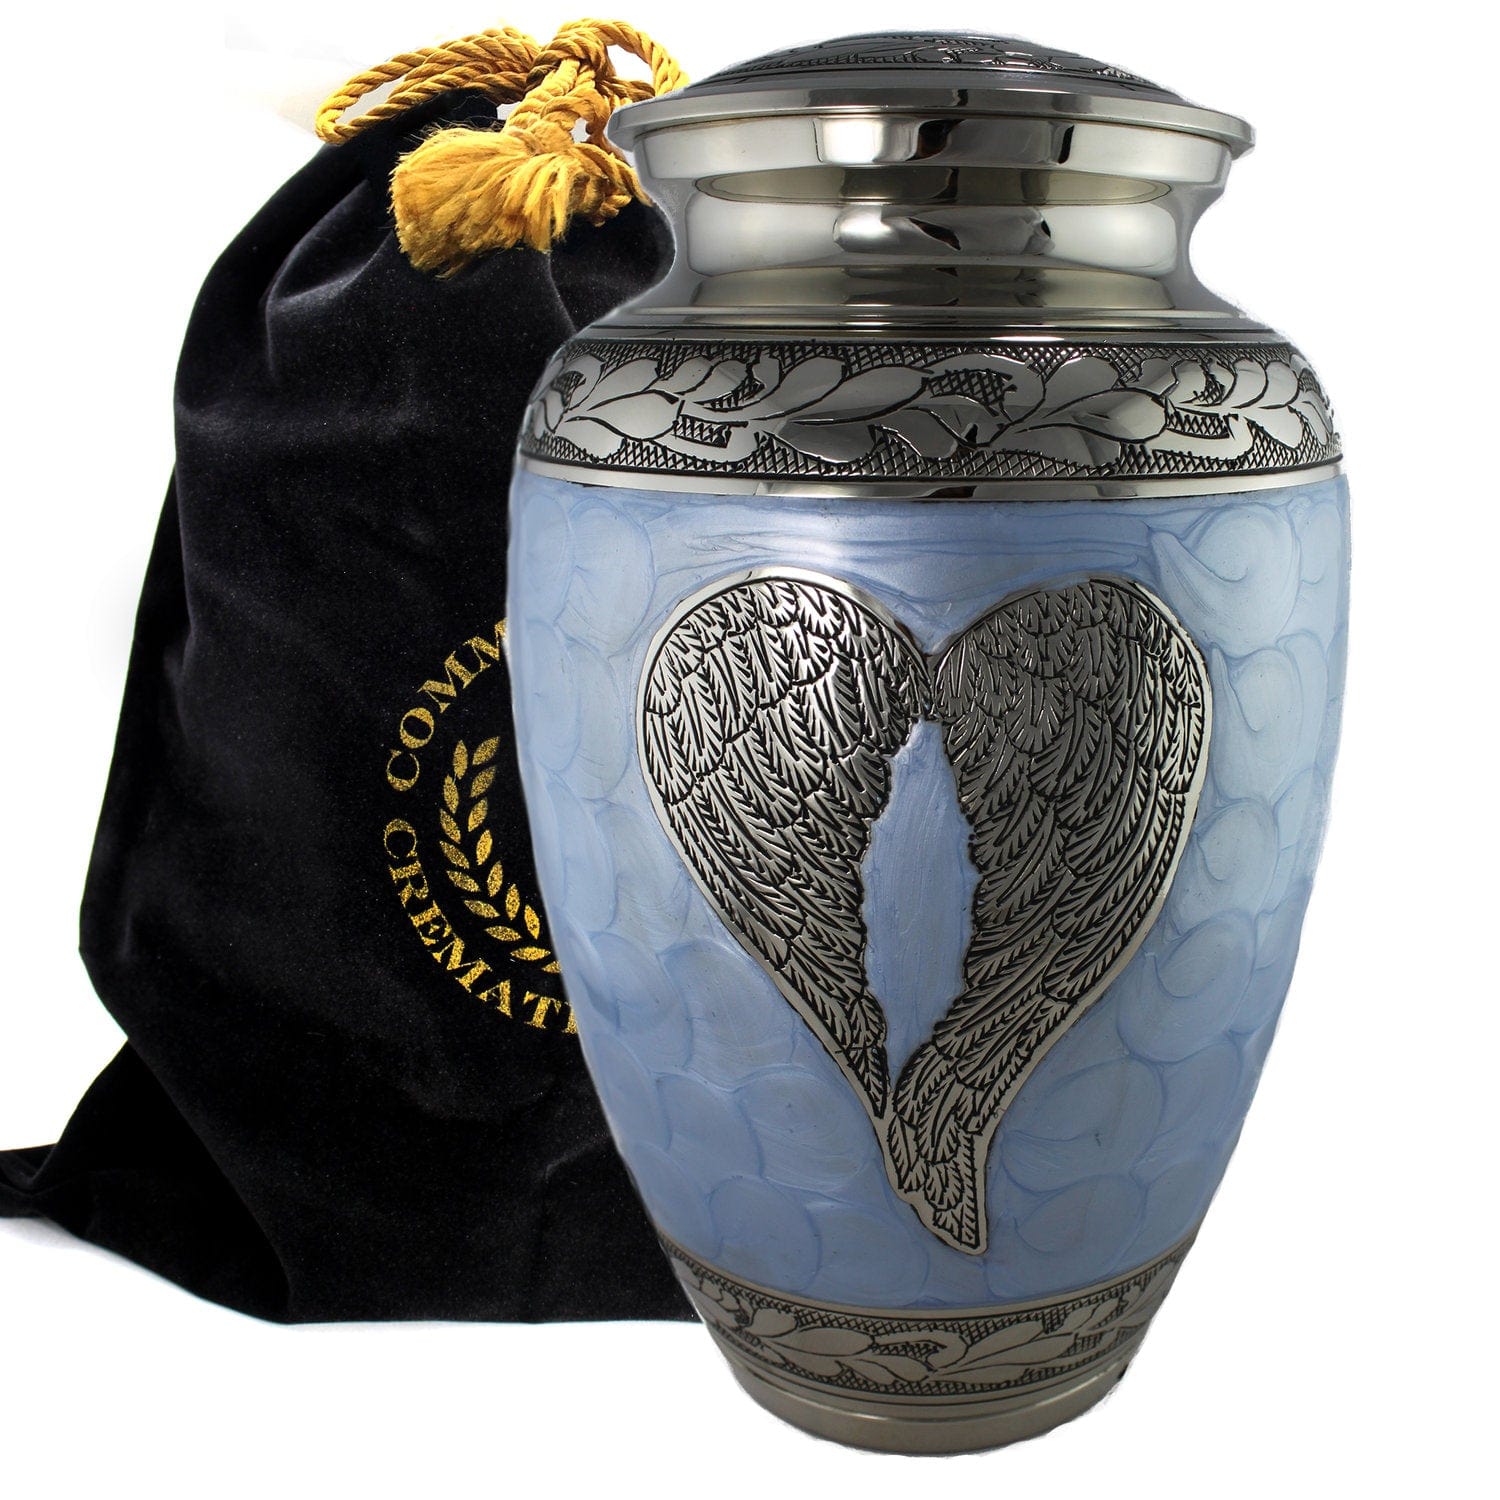 Commemorative Cremation Urns Home & Garden Large Baby Blue Loving Angel Wings Cremation Urn